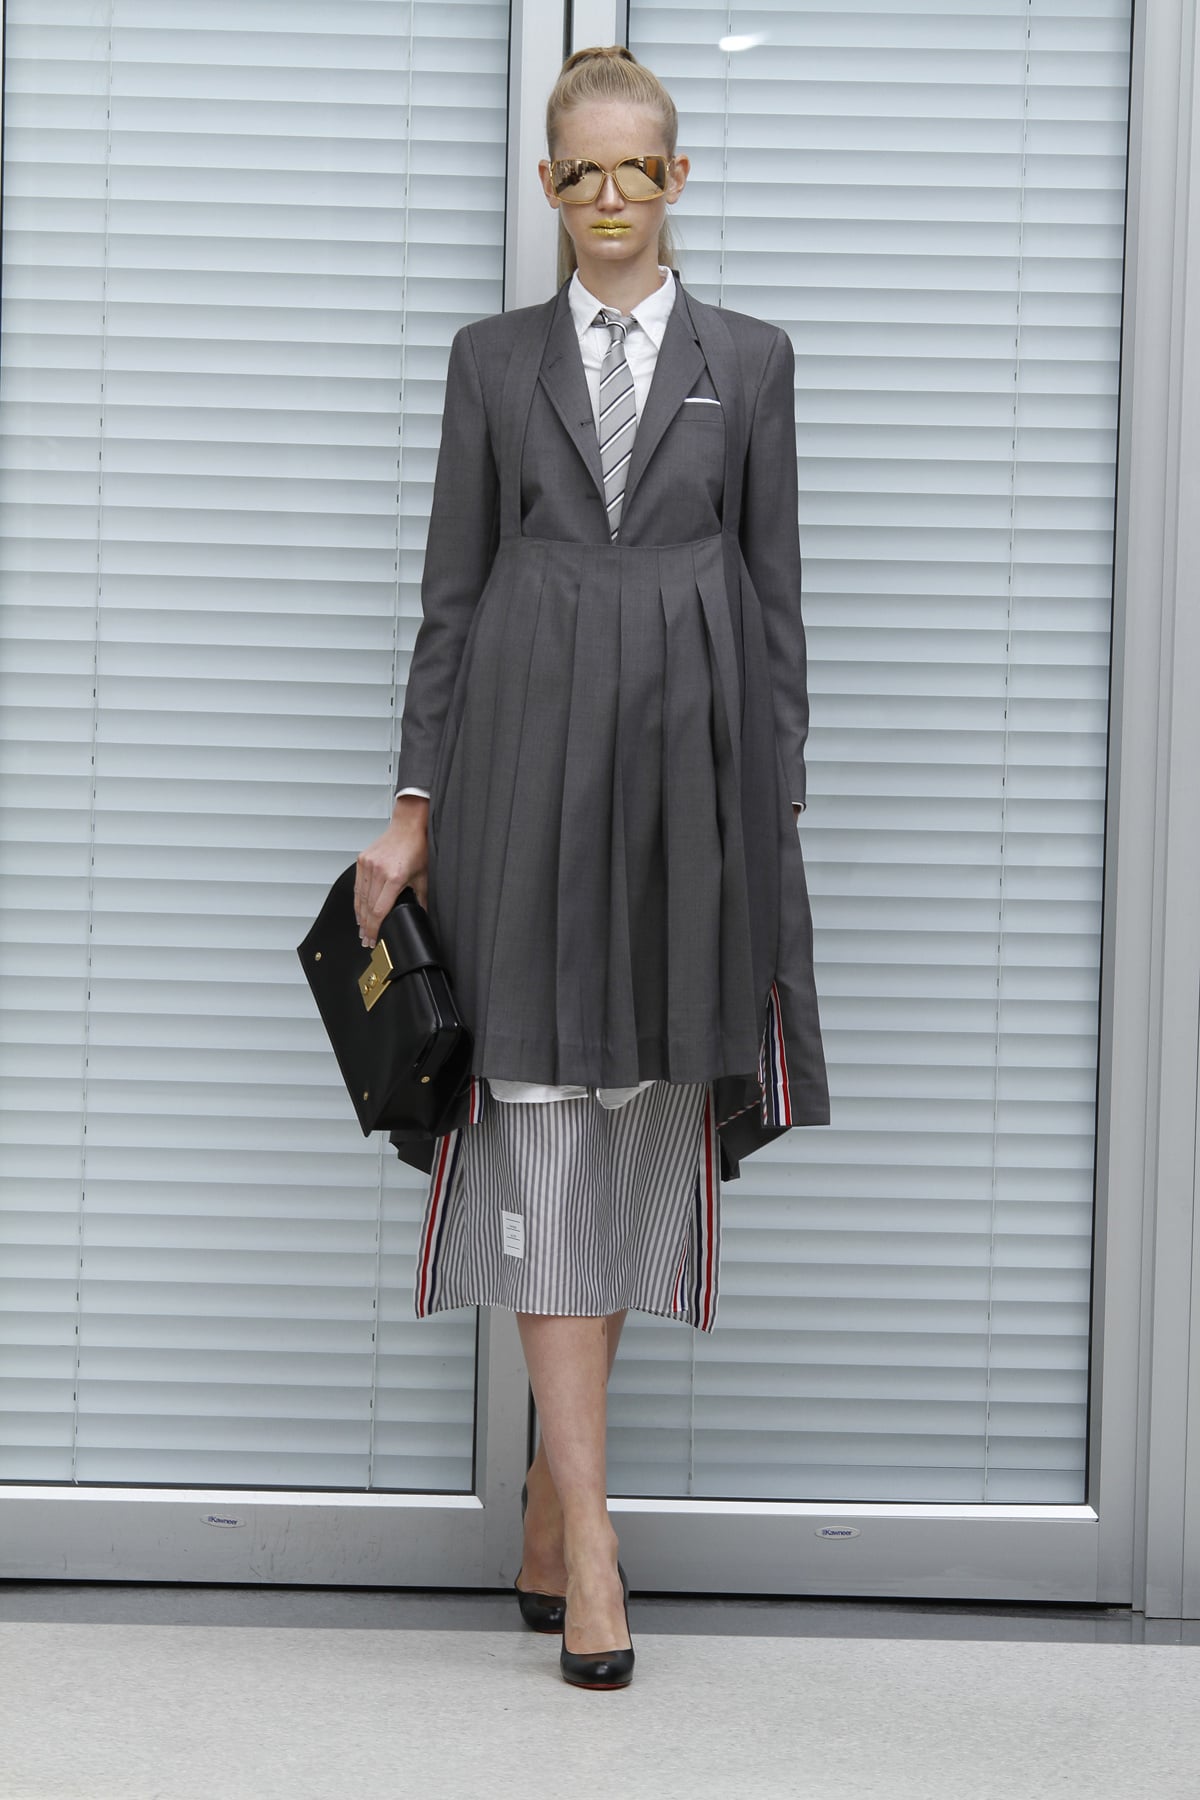 Photos Of Thom Browne Women S Spring 2011 Collection Popsugar Fashion